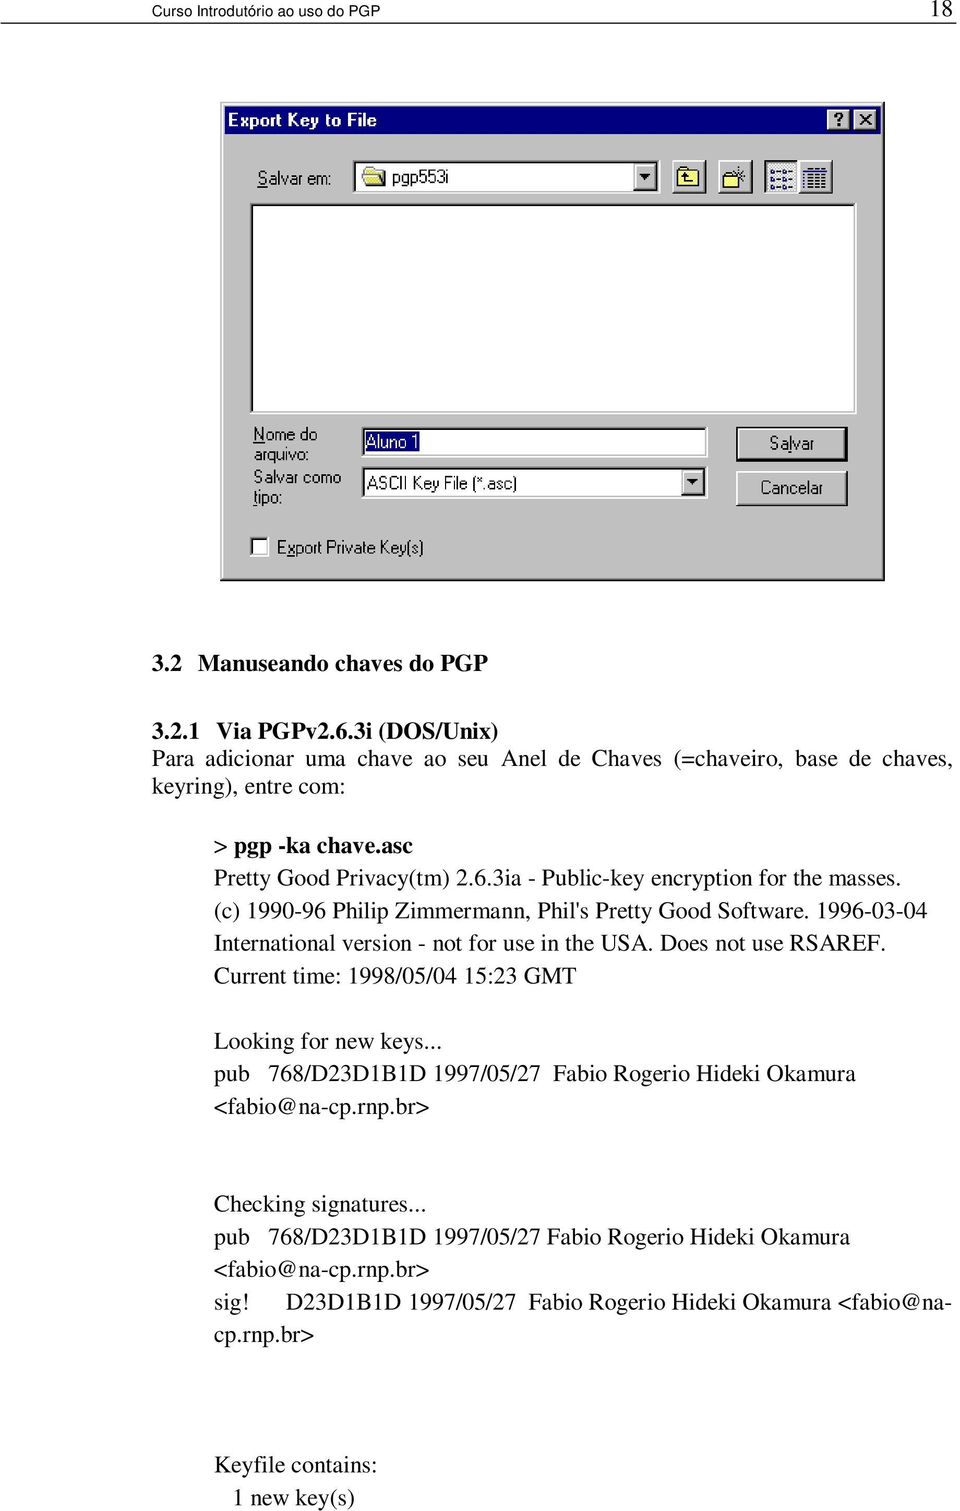 3ia - Public-key encryption for the masses. (c) 1990-96 Philip Zimmermann, Phil's Pretty Good Software. 1996-03-04 International version - not for use in the USA. Does not use RSAREF.